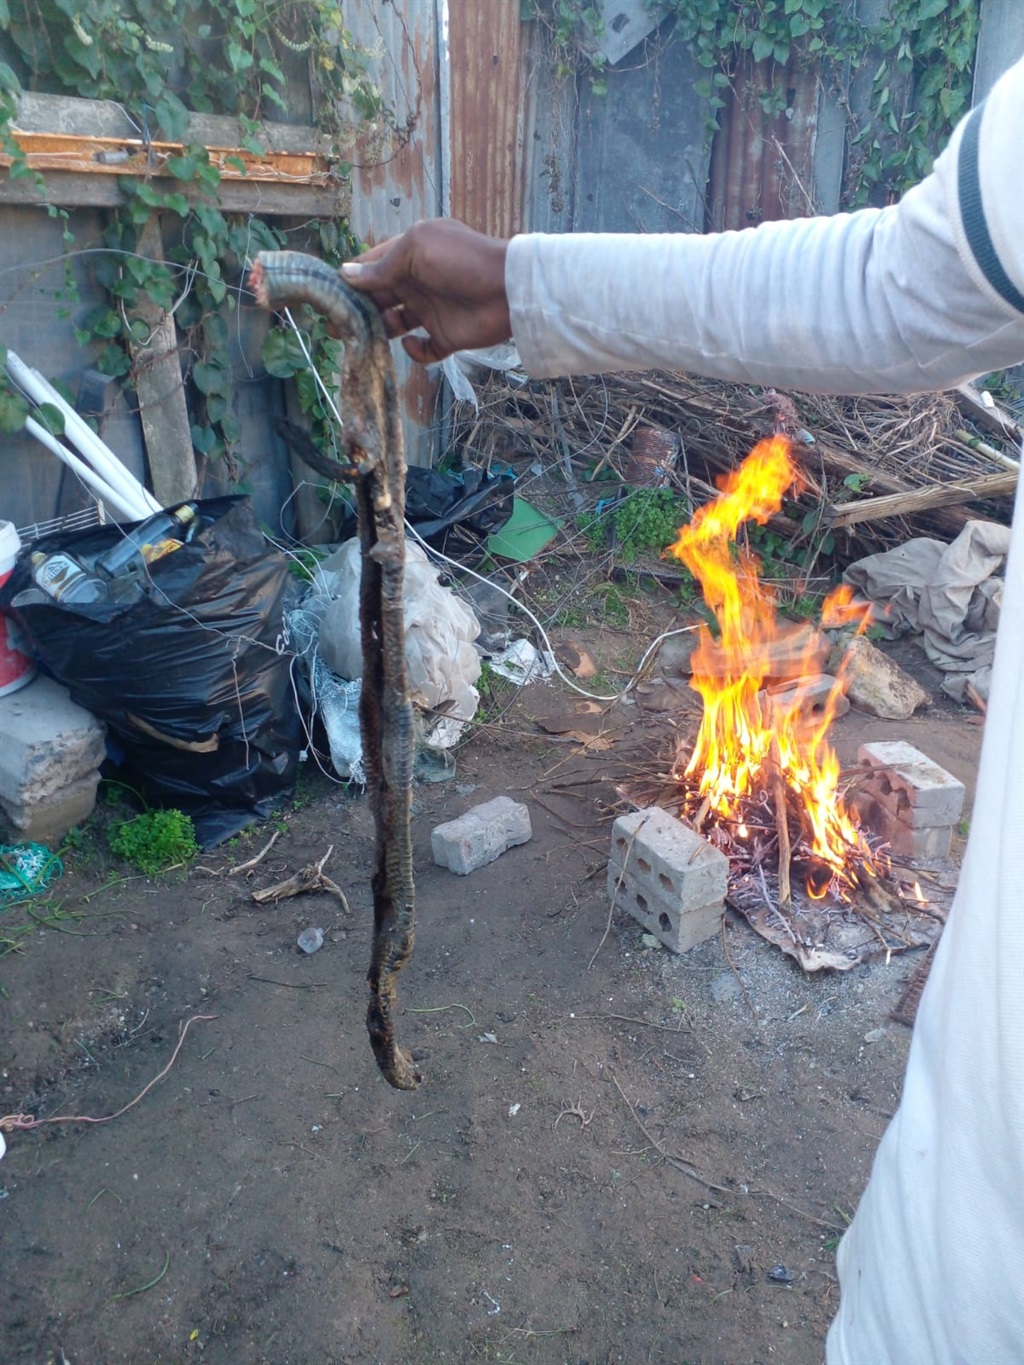 Residents roasted and ate a python after they killed it. Photo by Lulekwa Mbadamane